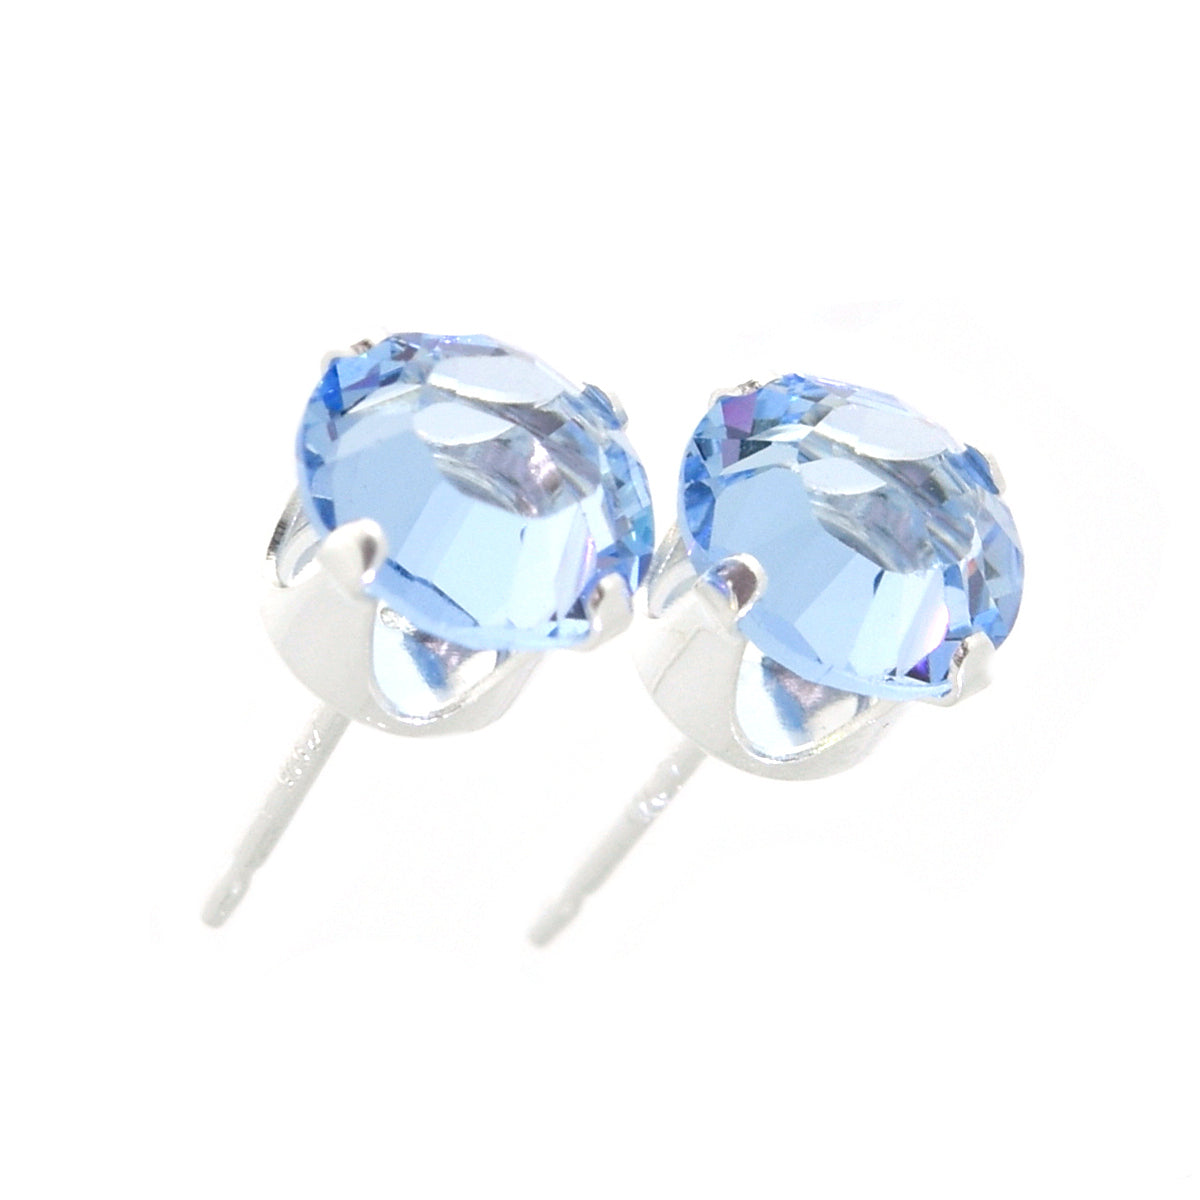 pewterhooter® Women's Classic Collection 925 Sterling silver earrings with sparkling Light Sapphire Blue channel crystals, packaged in a gift box for any occasion.